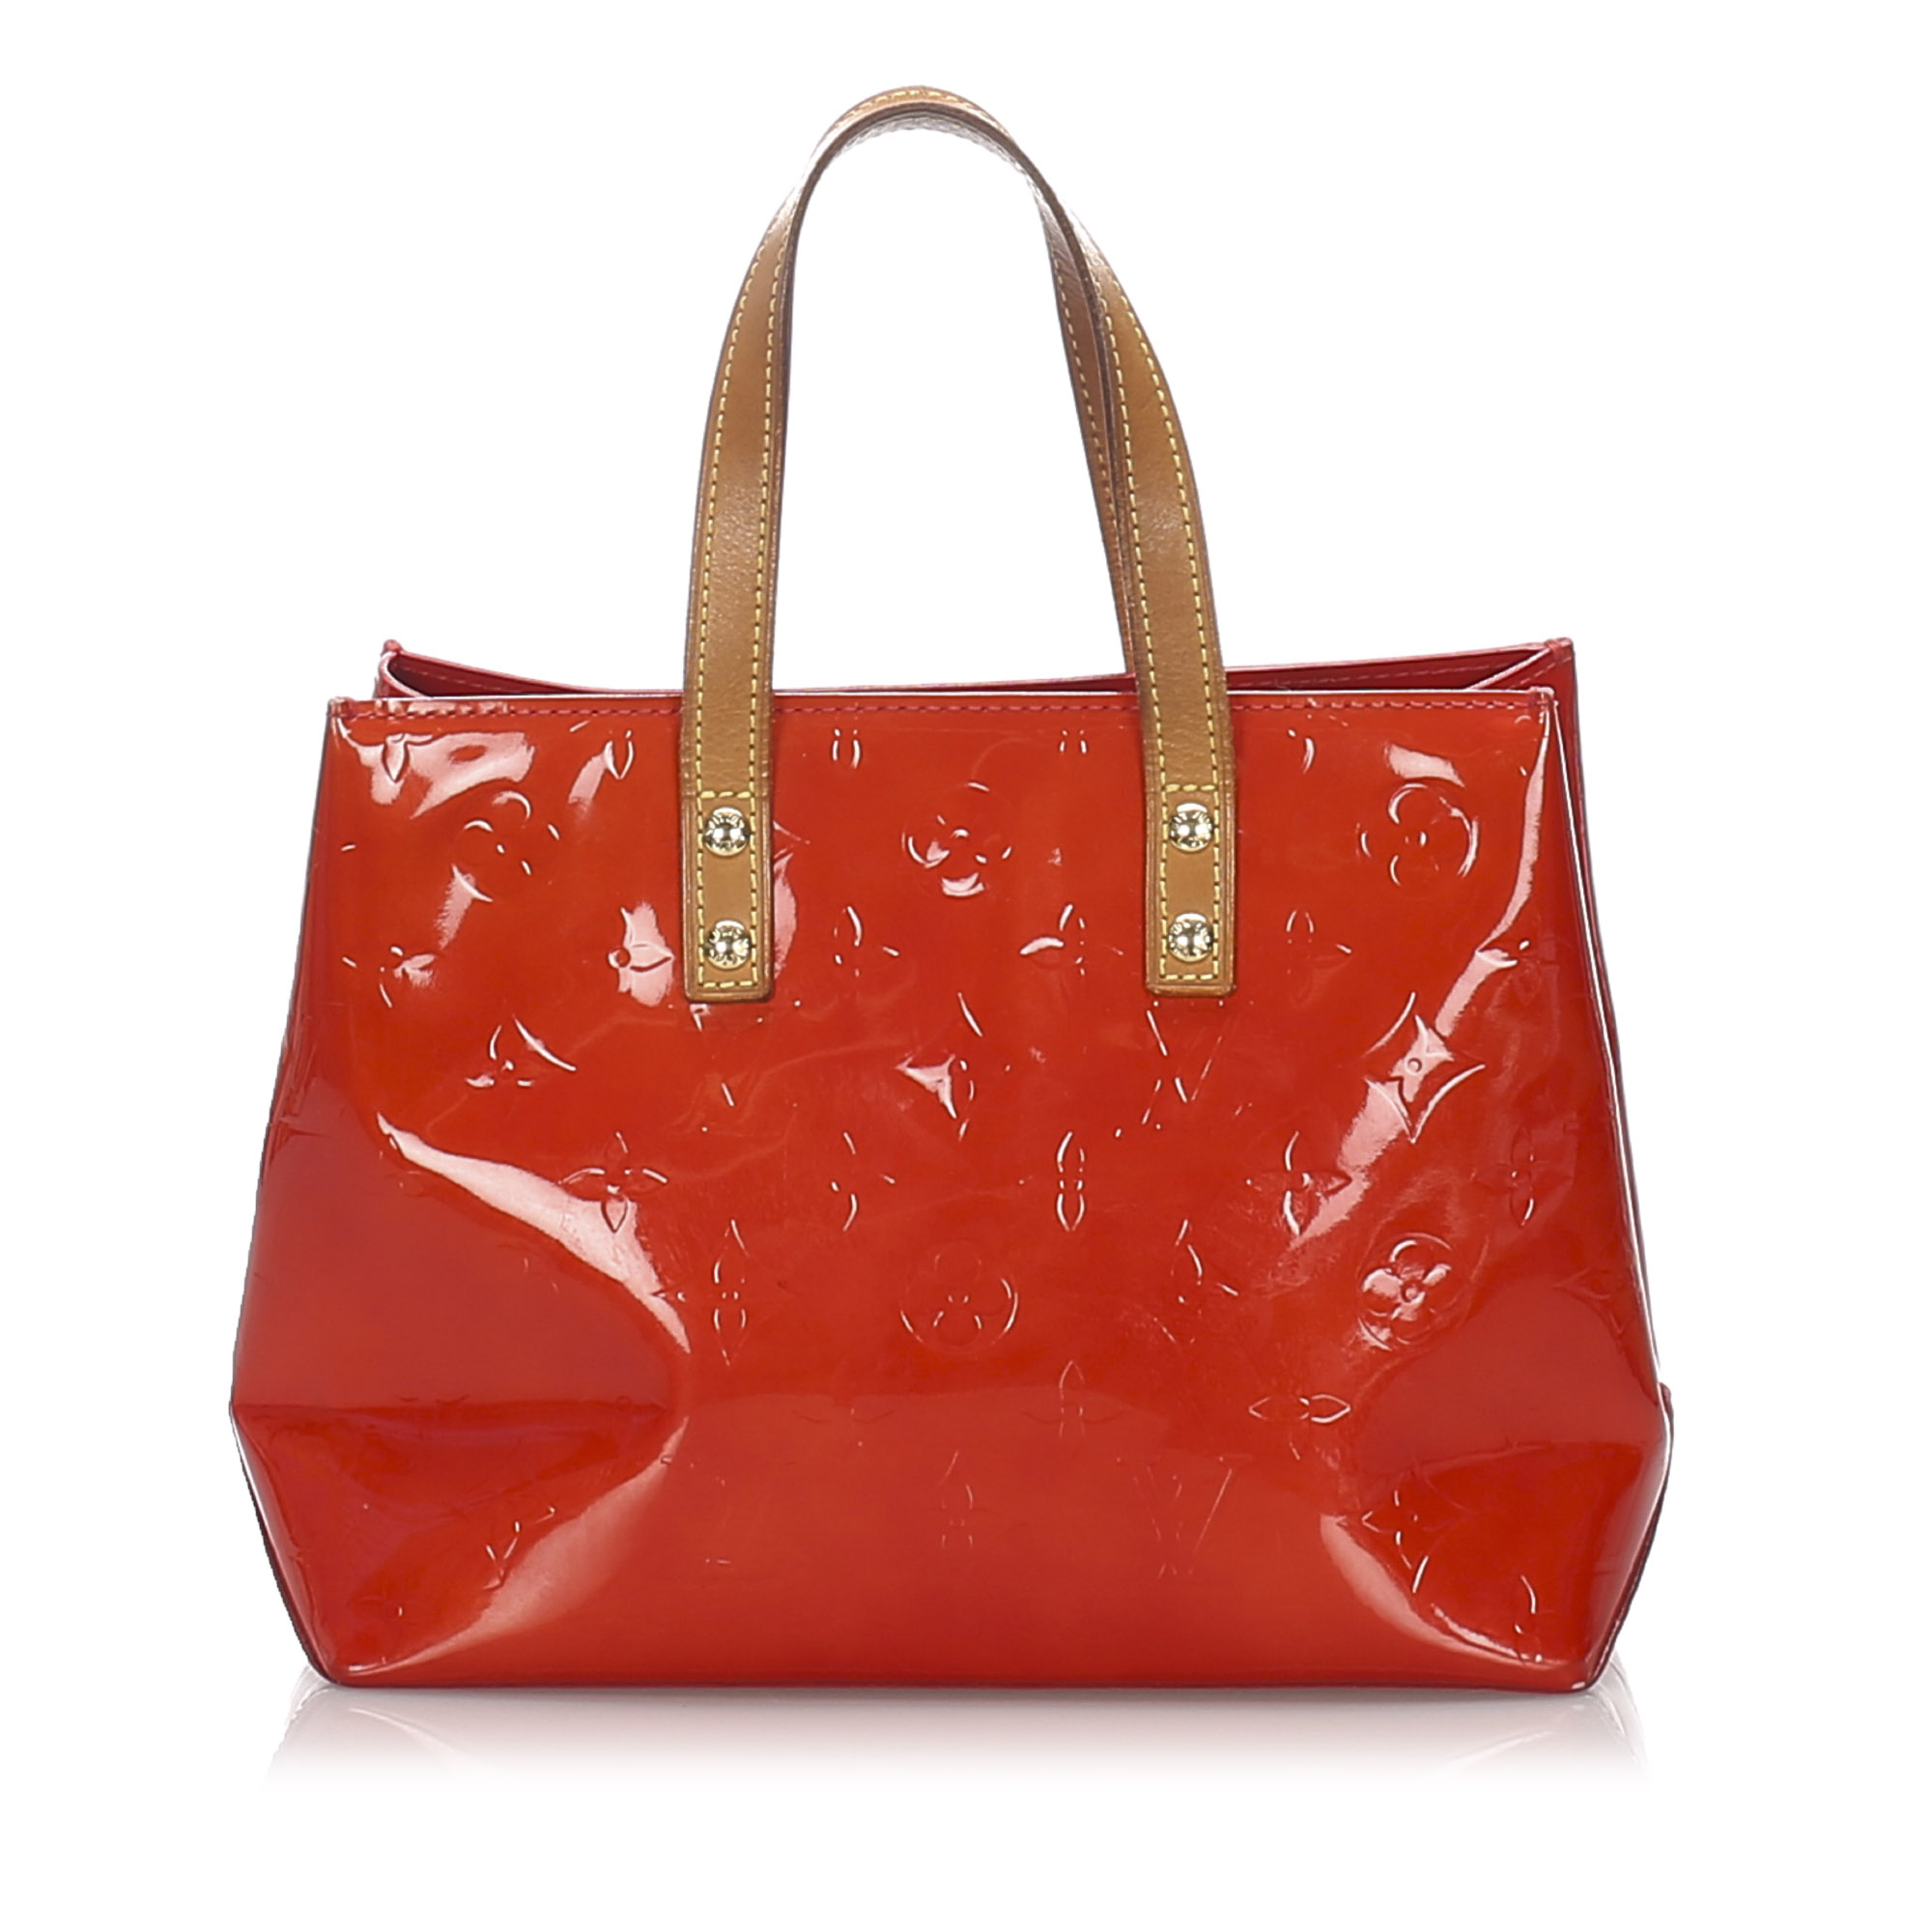 Pre-Loved Louis Vuitton Red Vernis Leather Reade PM France | eBay